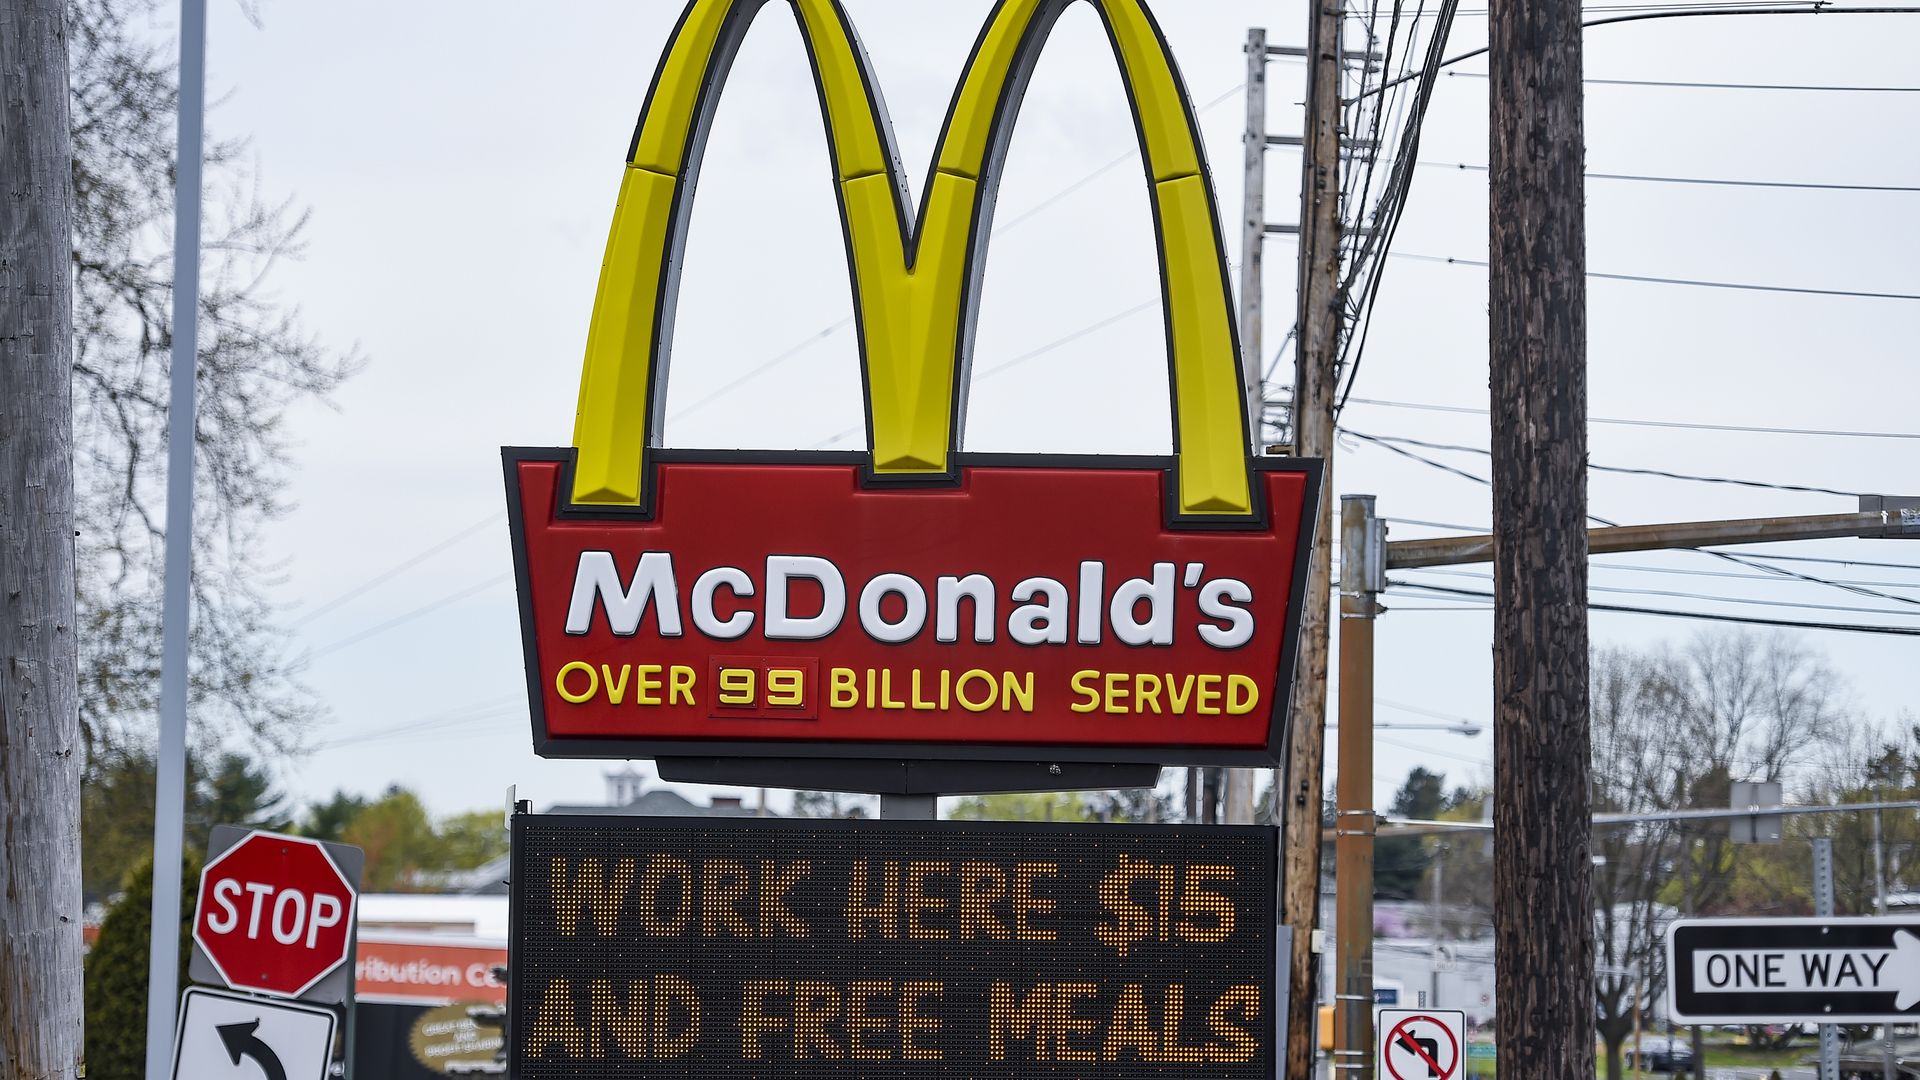 Picture of a McDonald's sign with a sign below it that says "work here $15 and free meals"